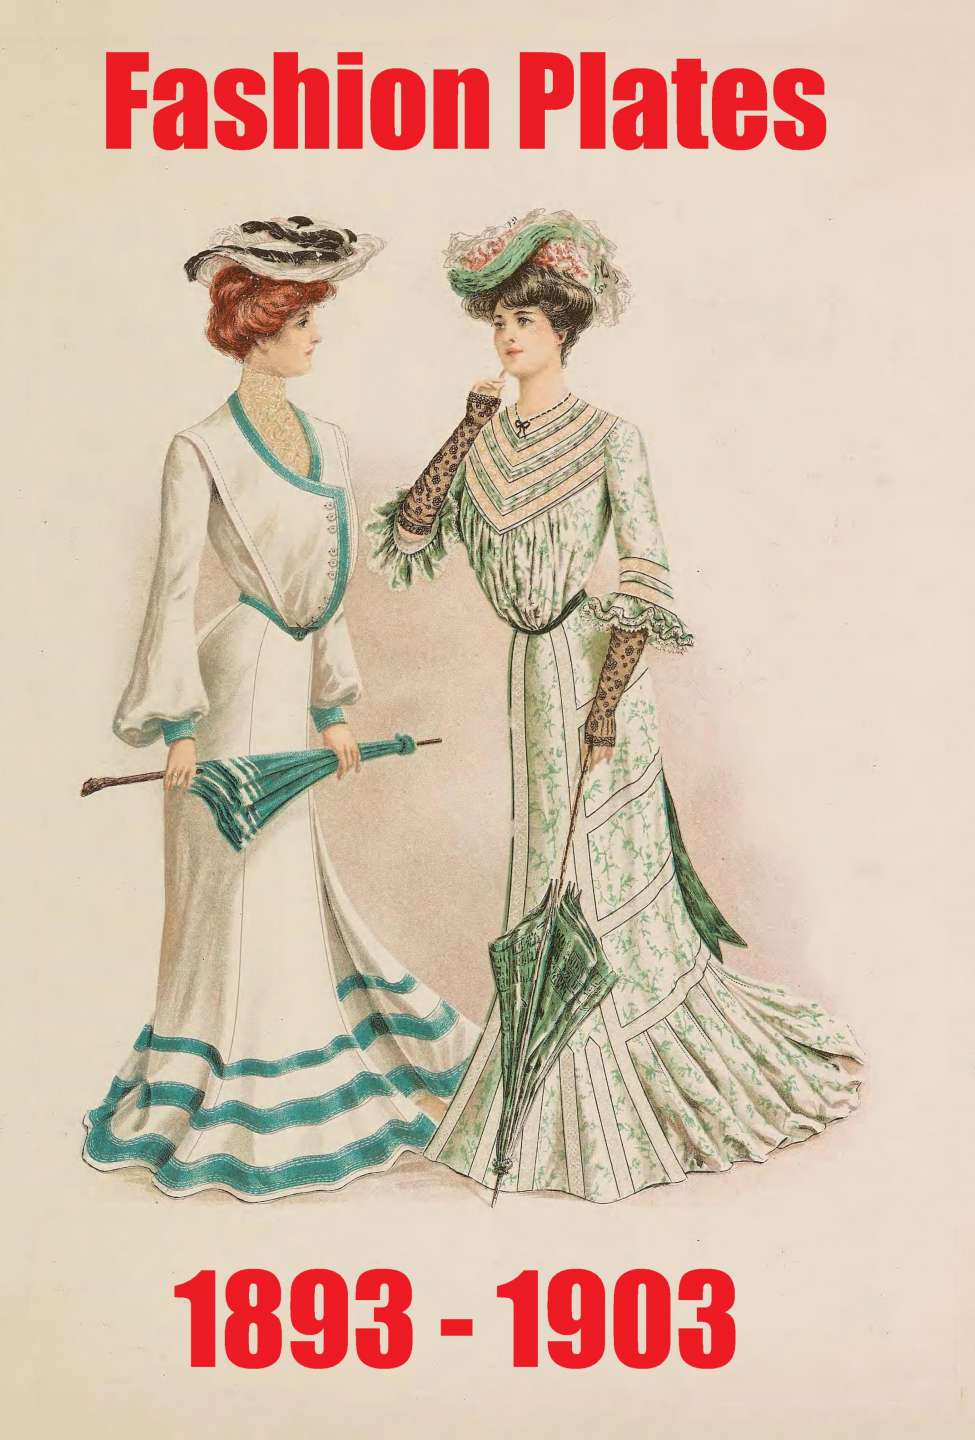 Book Cover For Fashion Plates 1893 - 1903